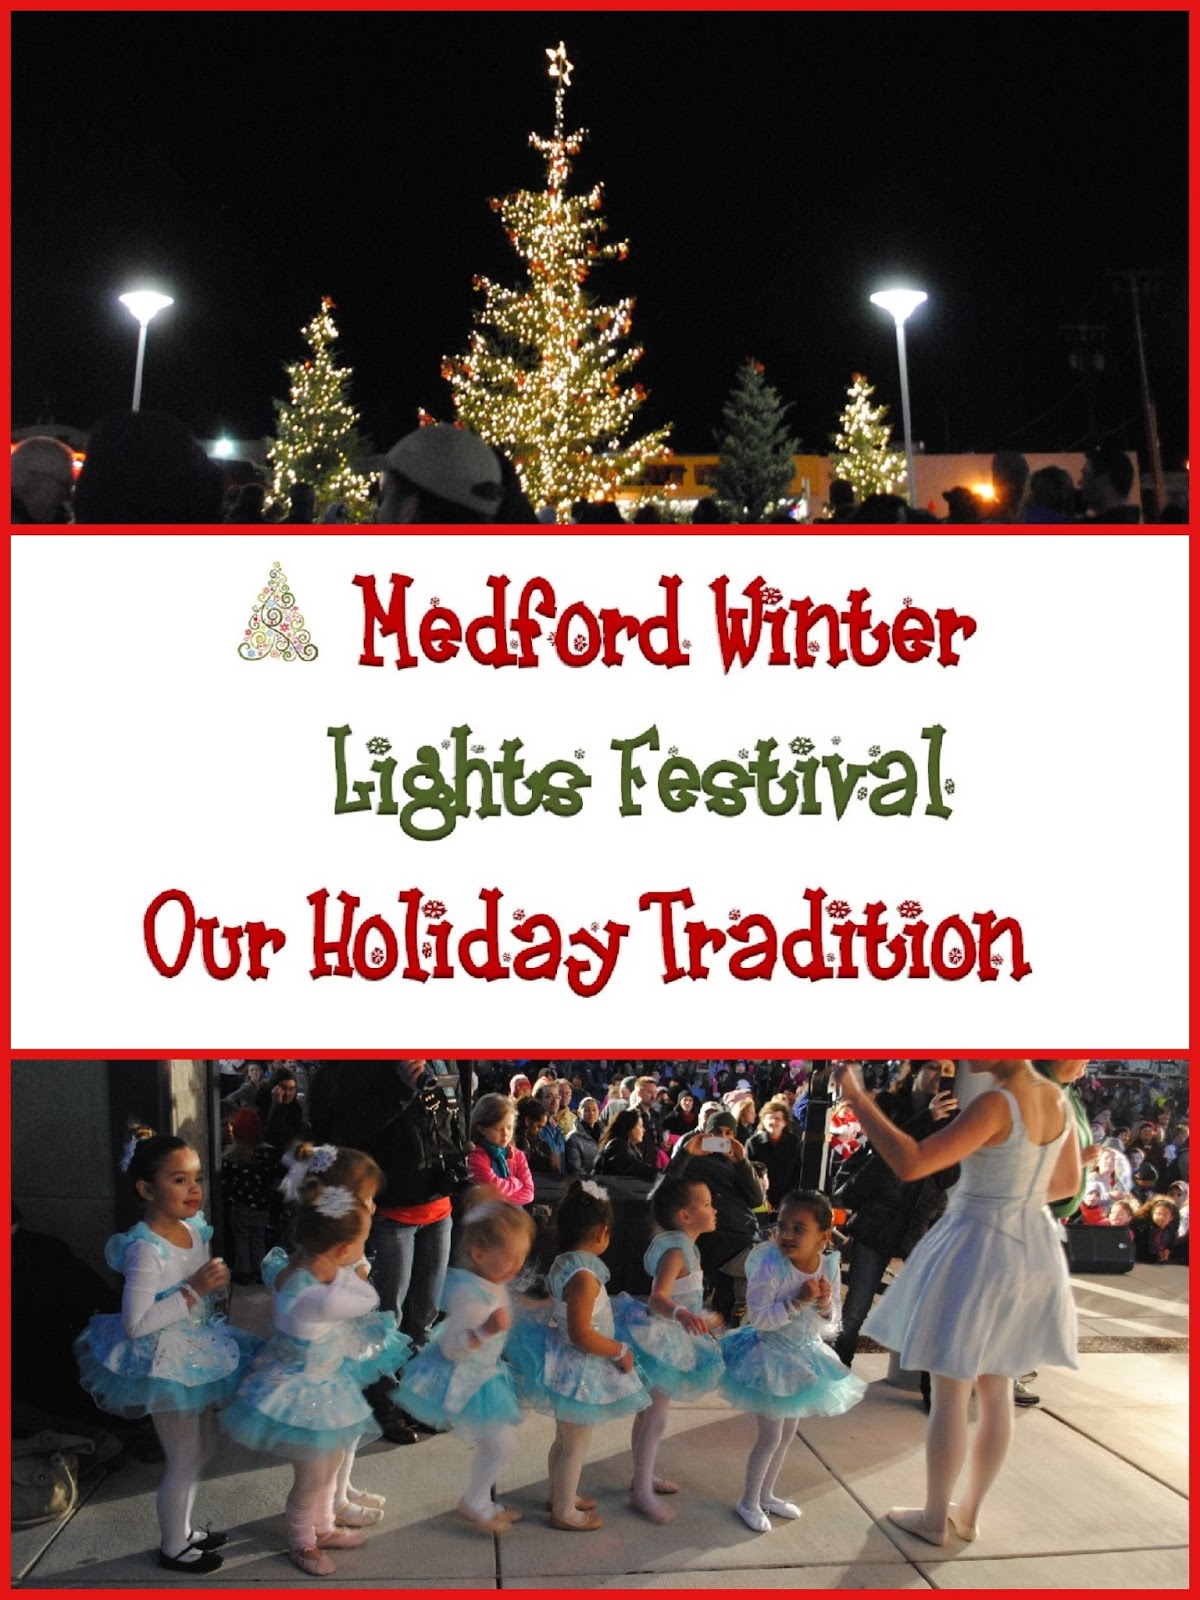 What to do in Southern Oregon MEDFORD WINTER LIGHTS FESTIVAL Our